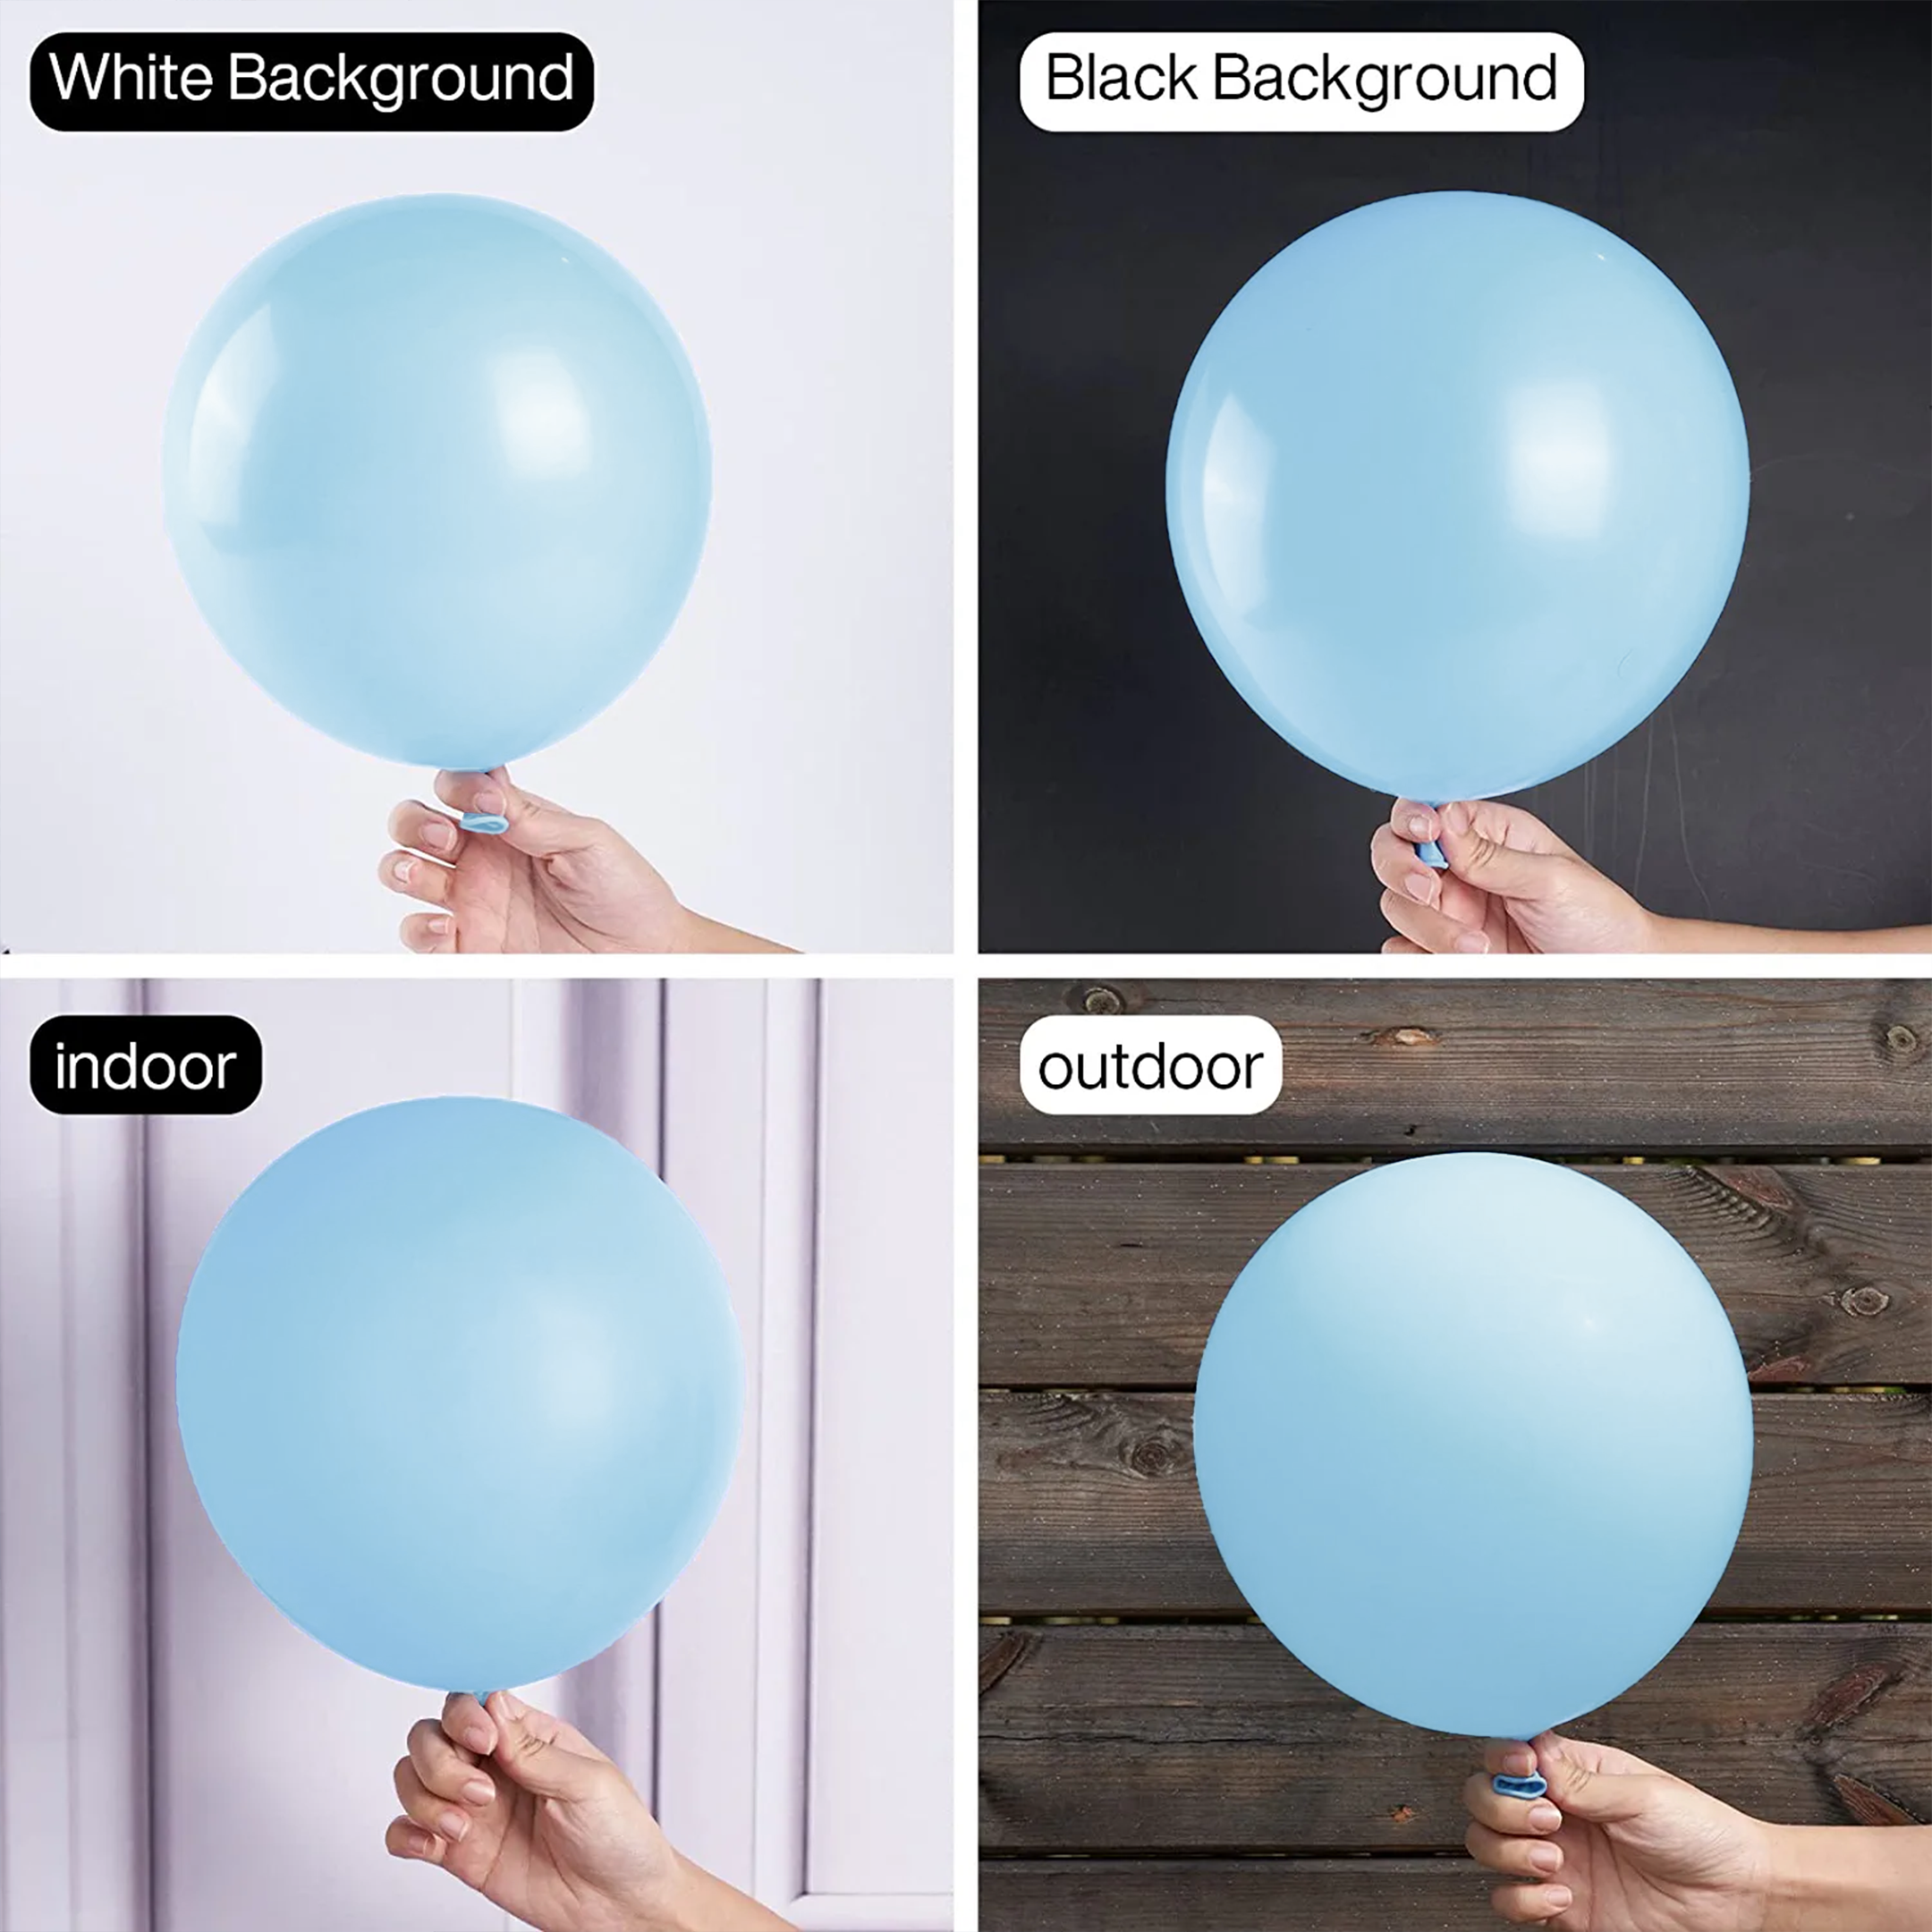 Pastel Blue Balloons decoration for boys pack of 50 pcs